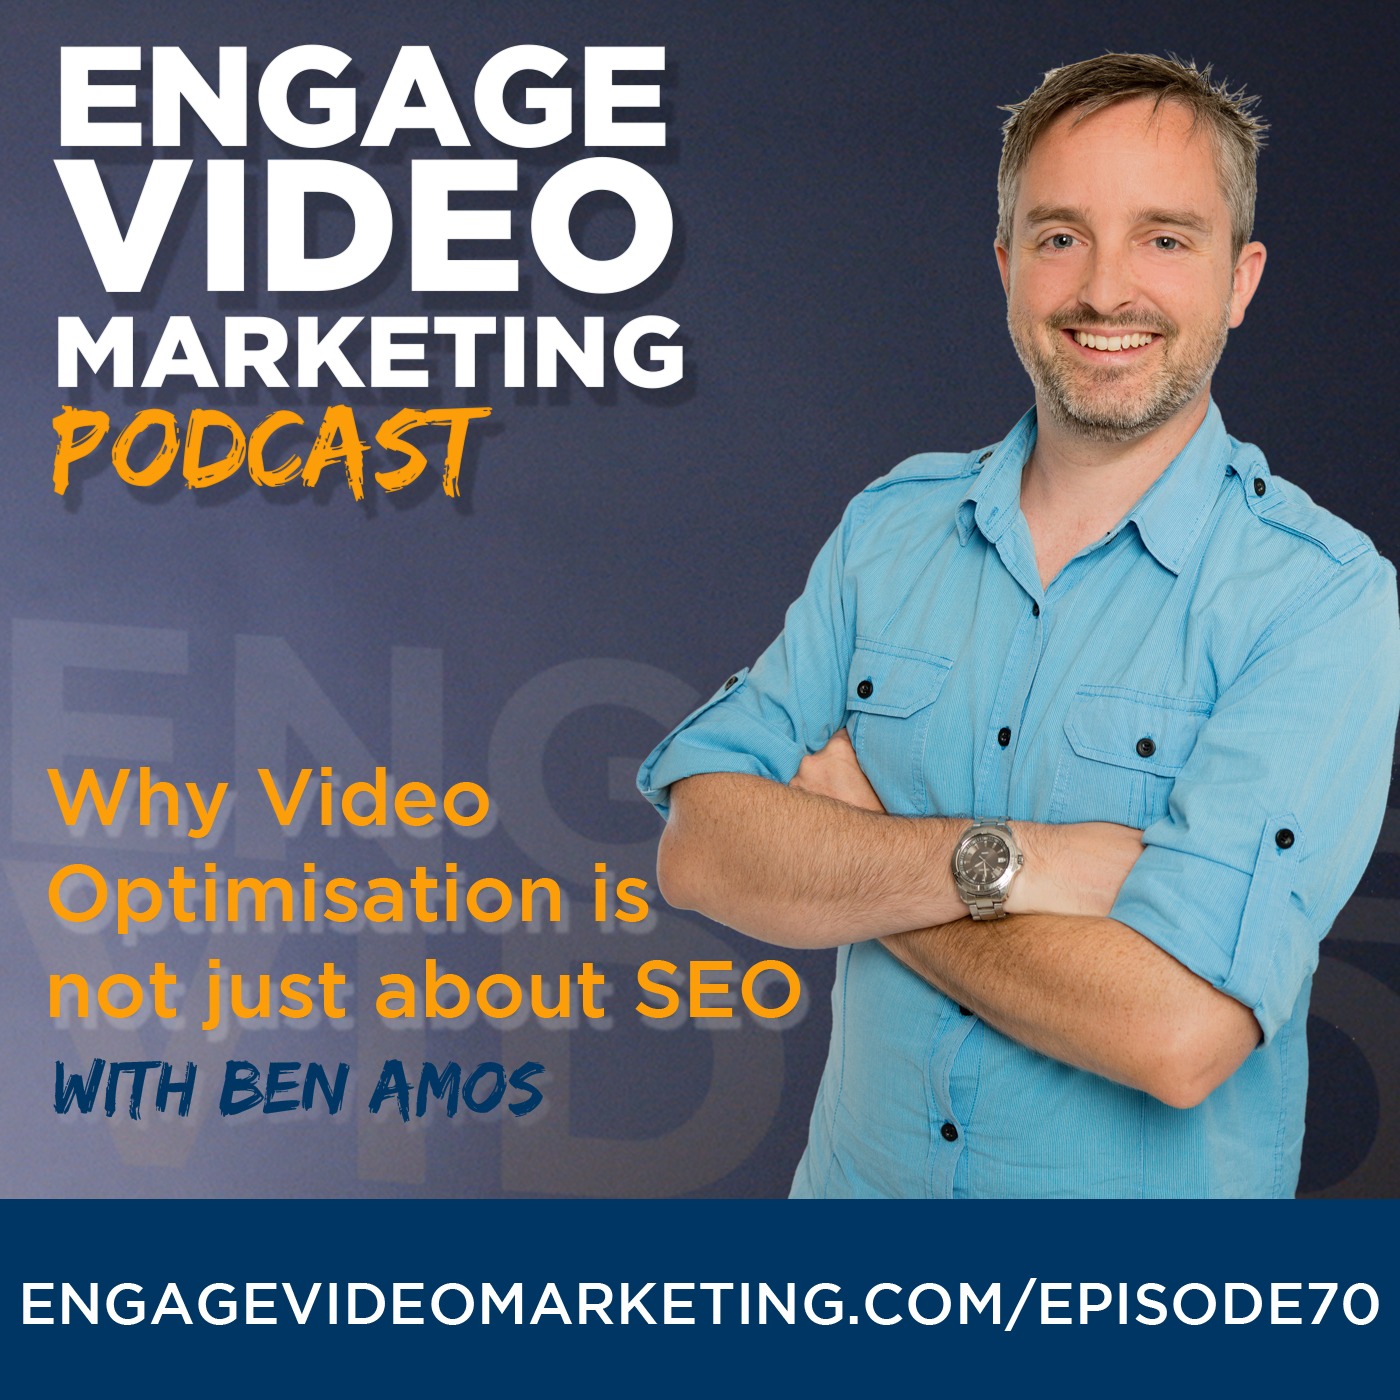 Why Video Optimisation is not just about SEO